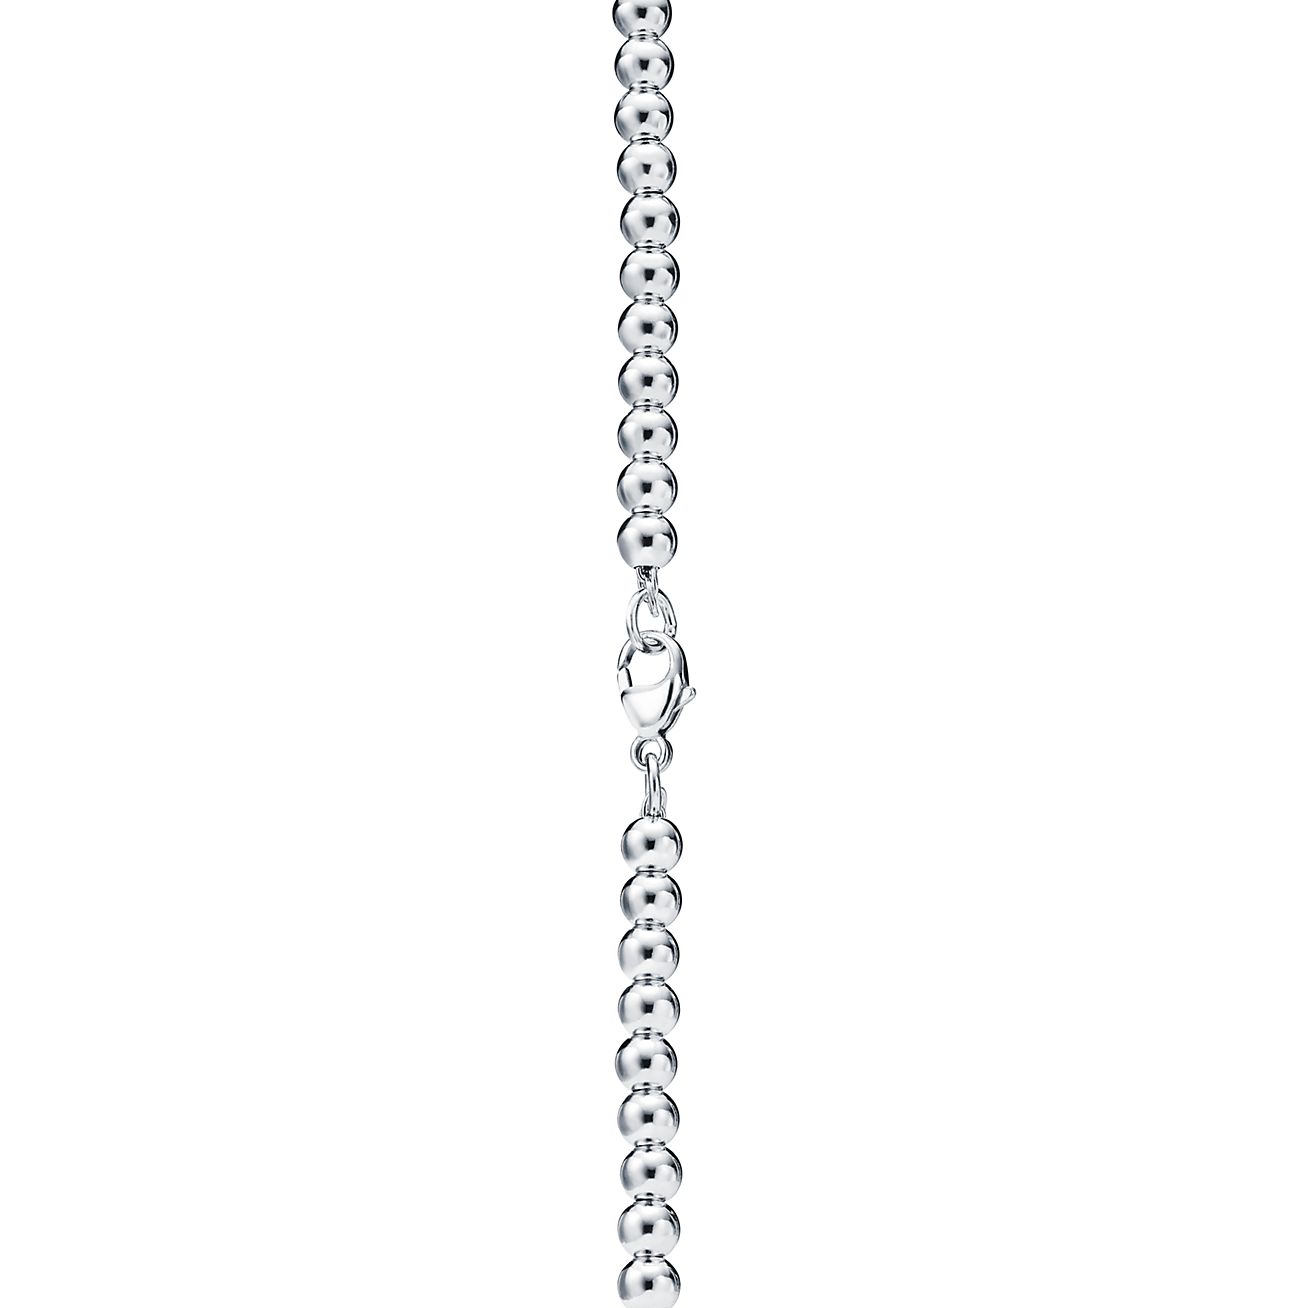 Tiffany & Co Silver Necklace 4 Pendant Charm 21 inch Bead Chain Longer Gift